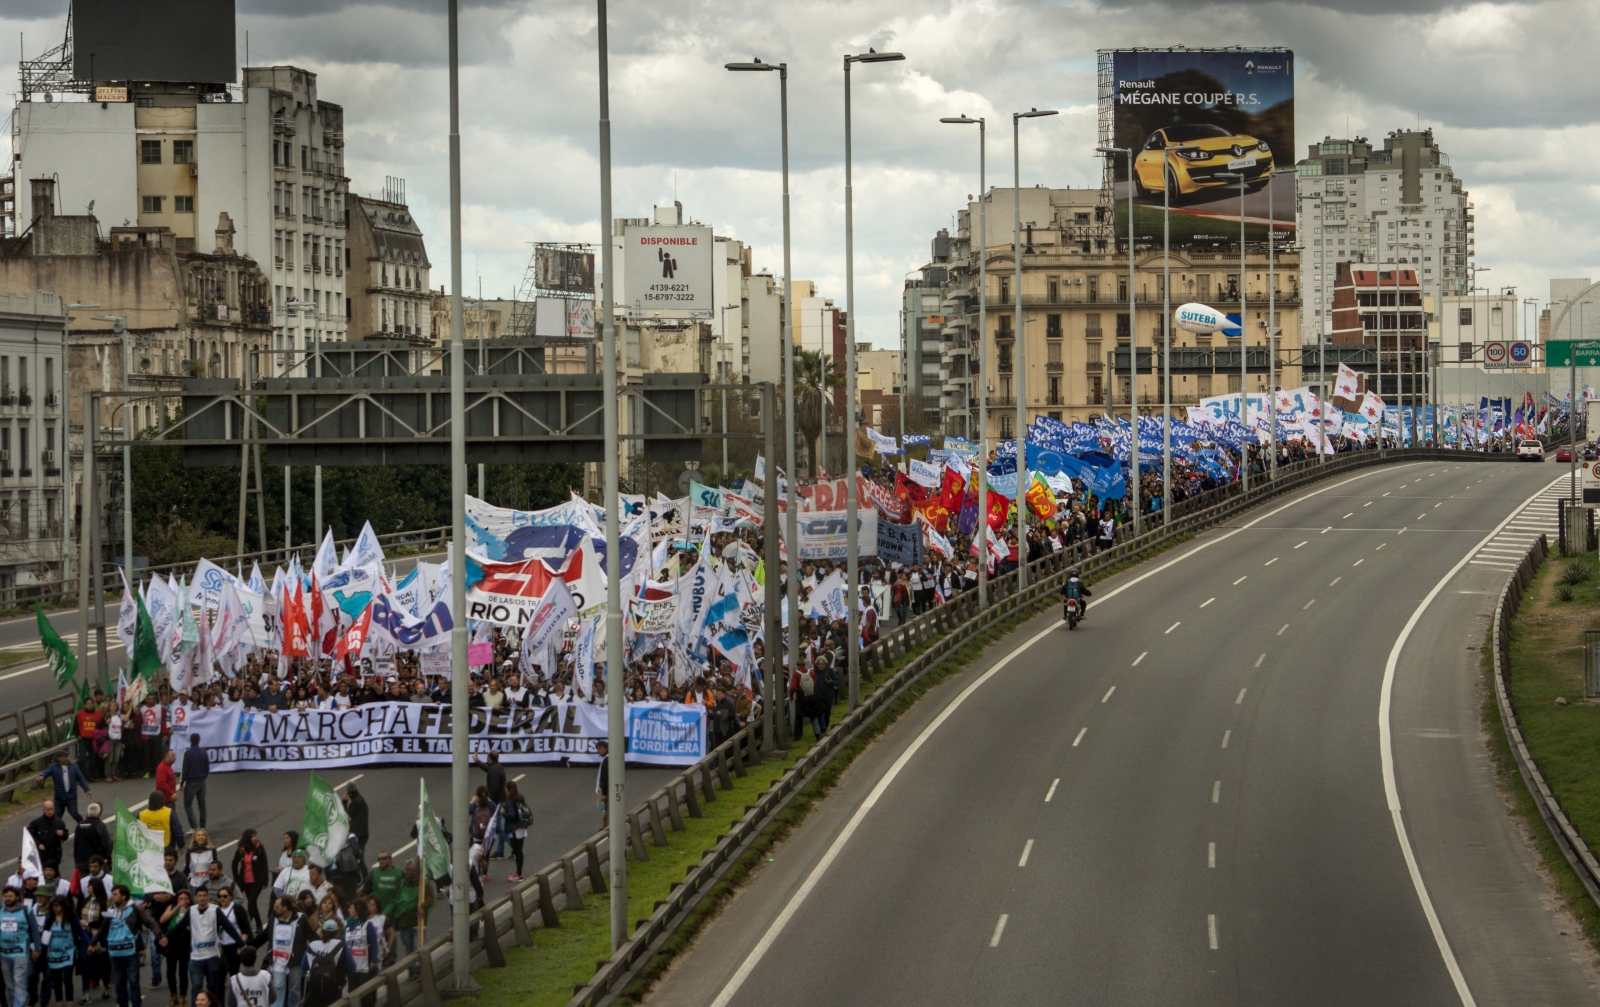 Argentina Tens of thousands protest against economic policies adopted